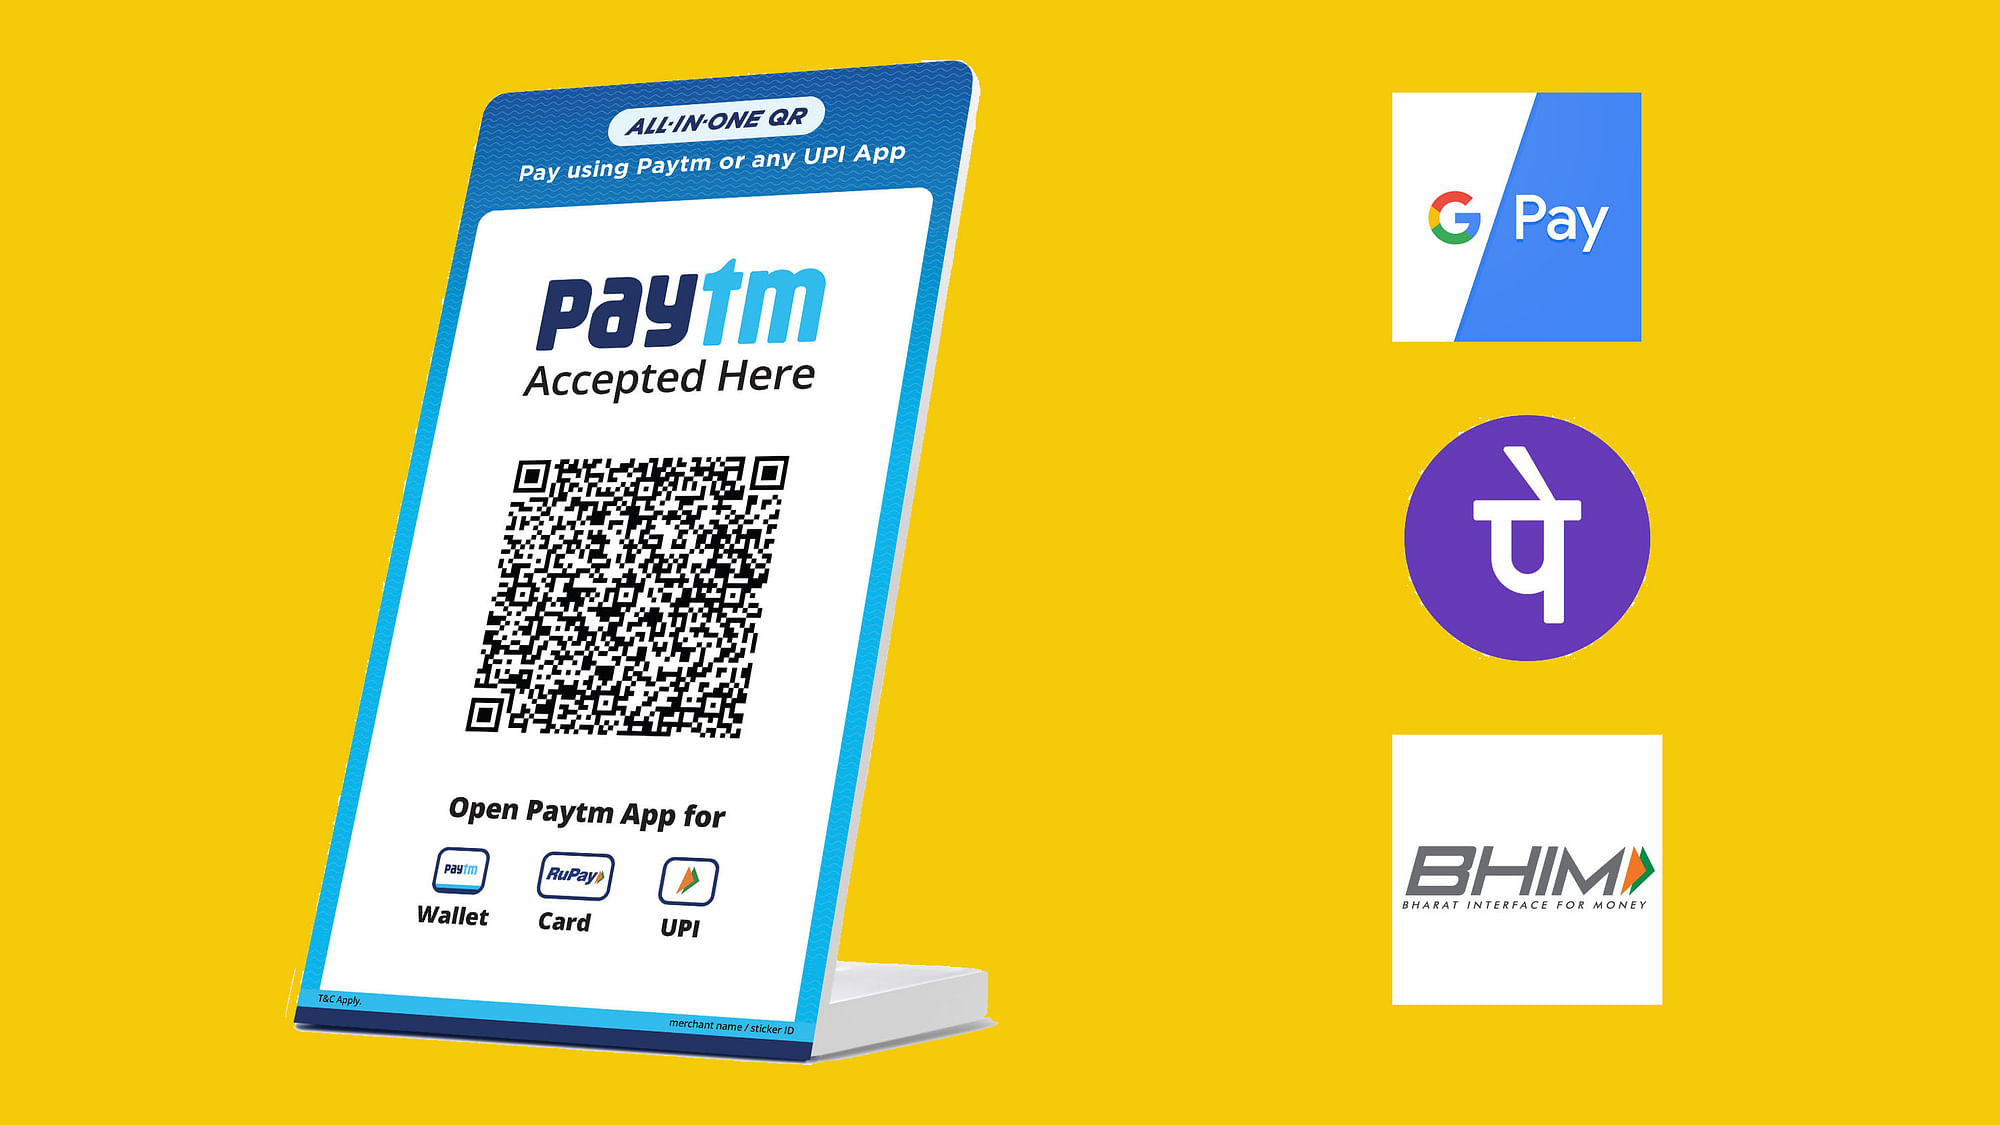 Want to pay via other UPI apps? This Paytm QR code will let you do that.